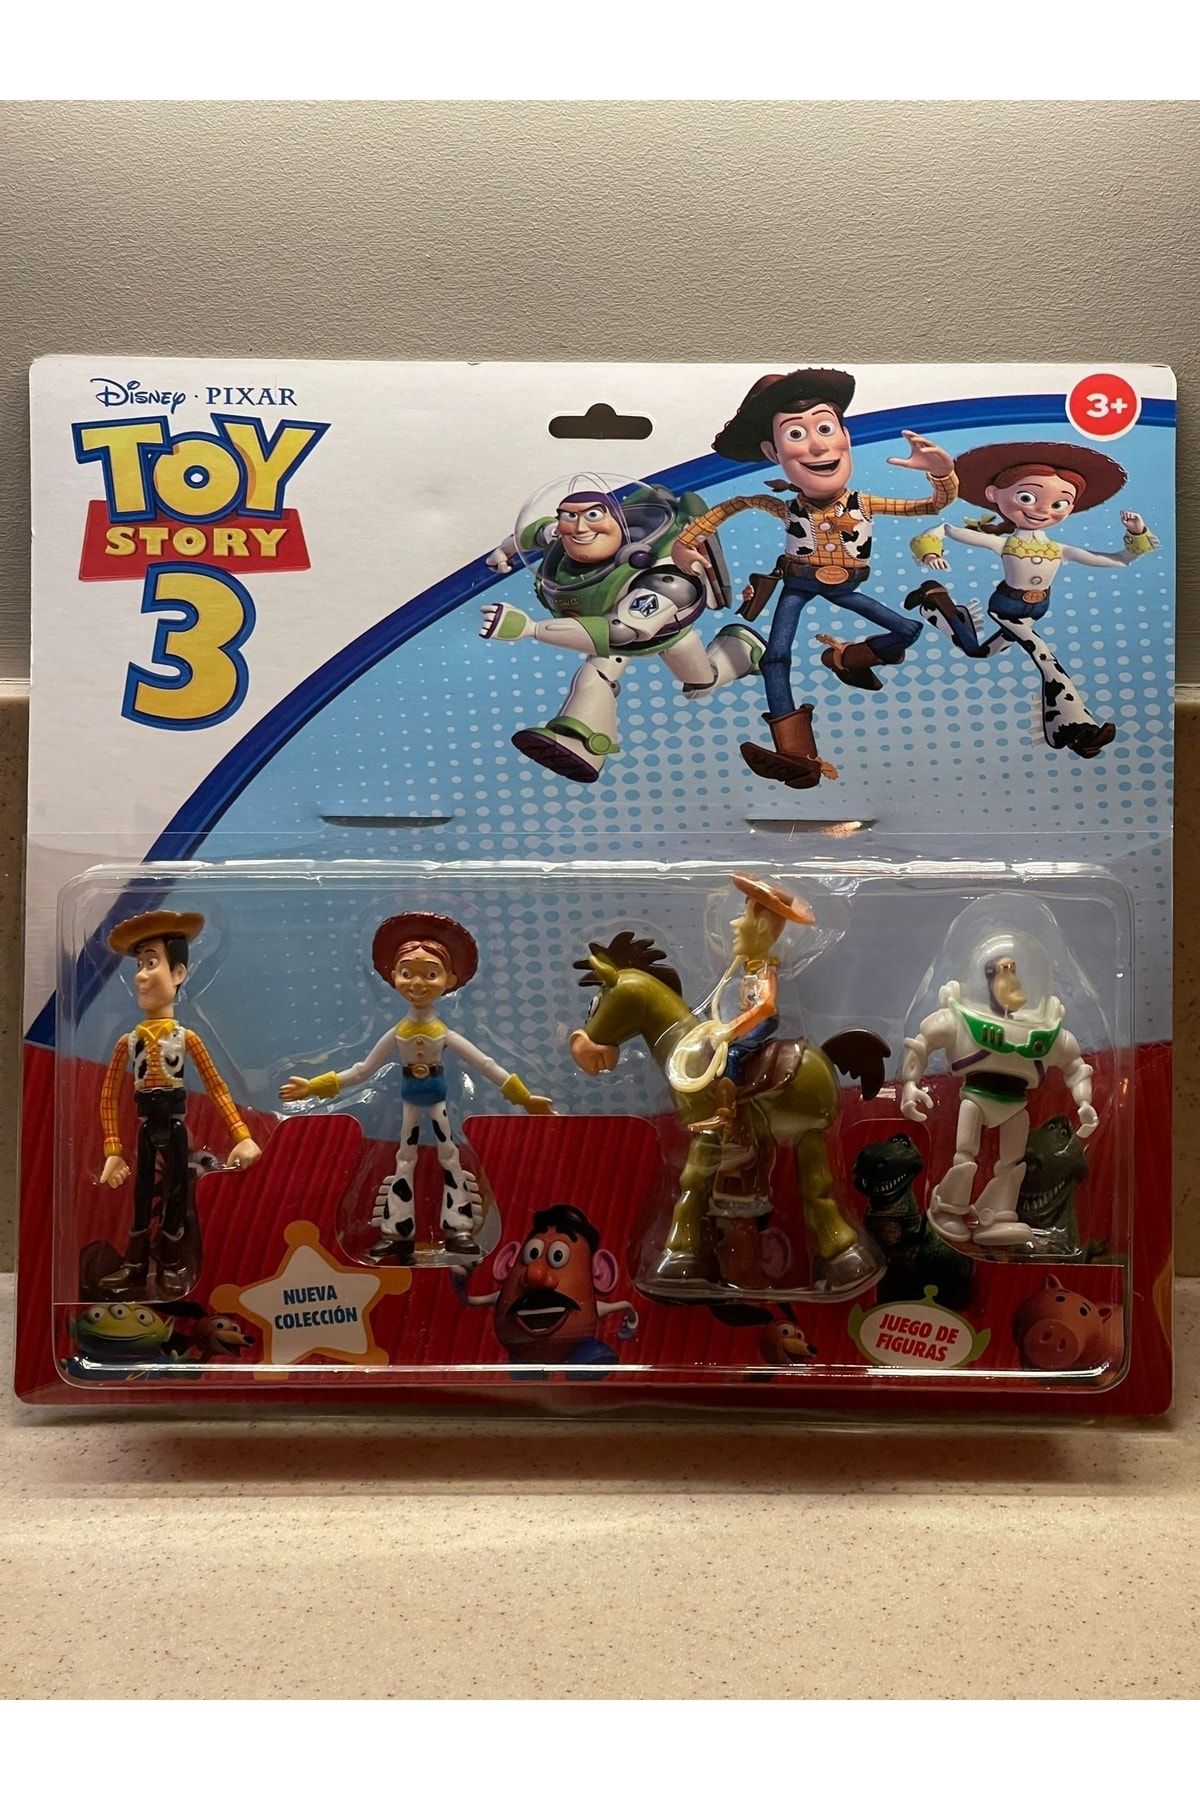 Cold Easy Action Figure, Robot Toystory Oyuncak Hikayesi Buzz Lightyear, Toy Story